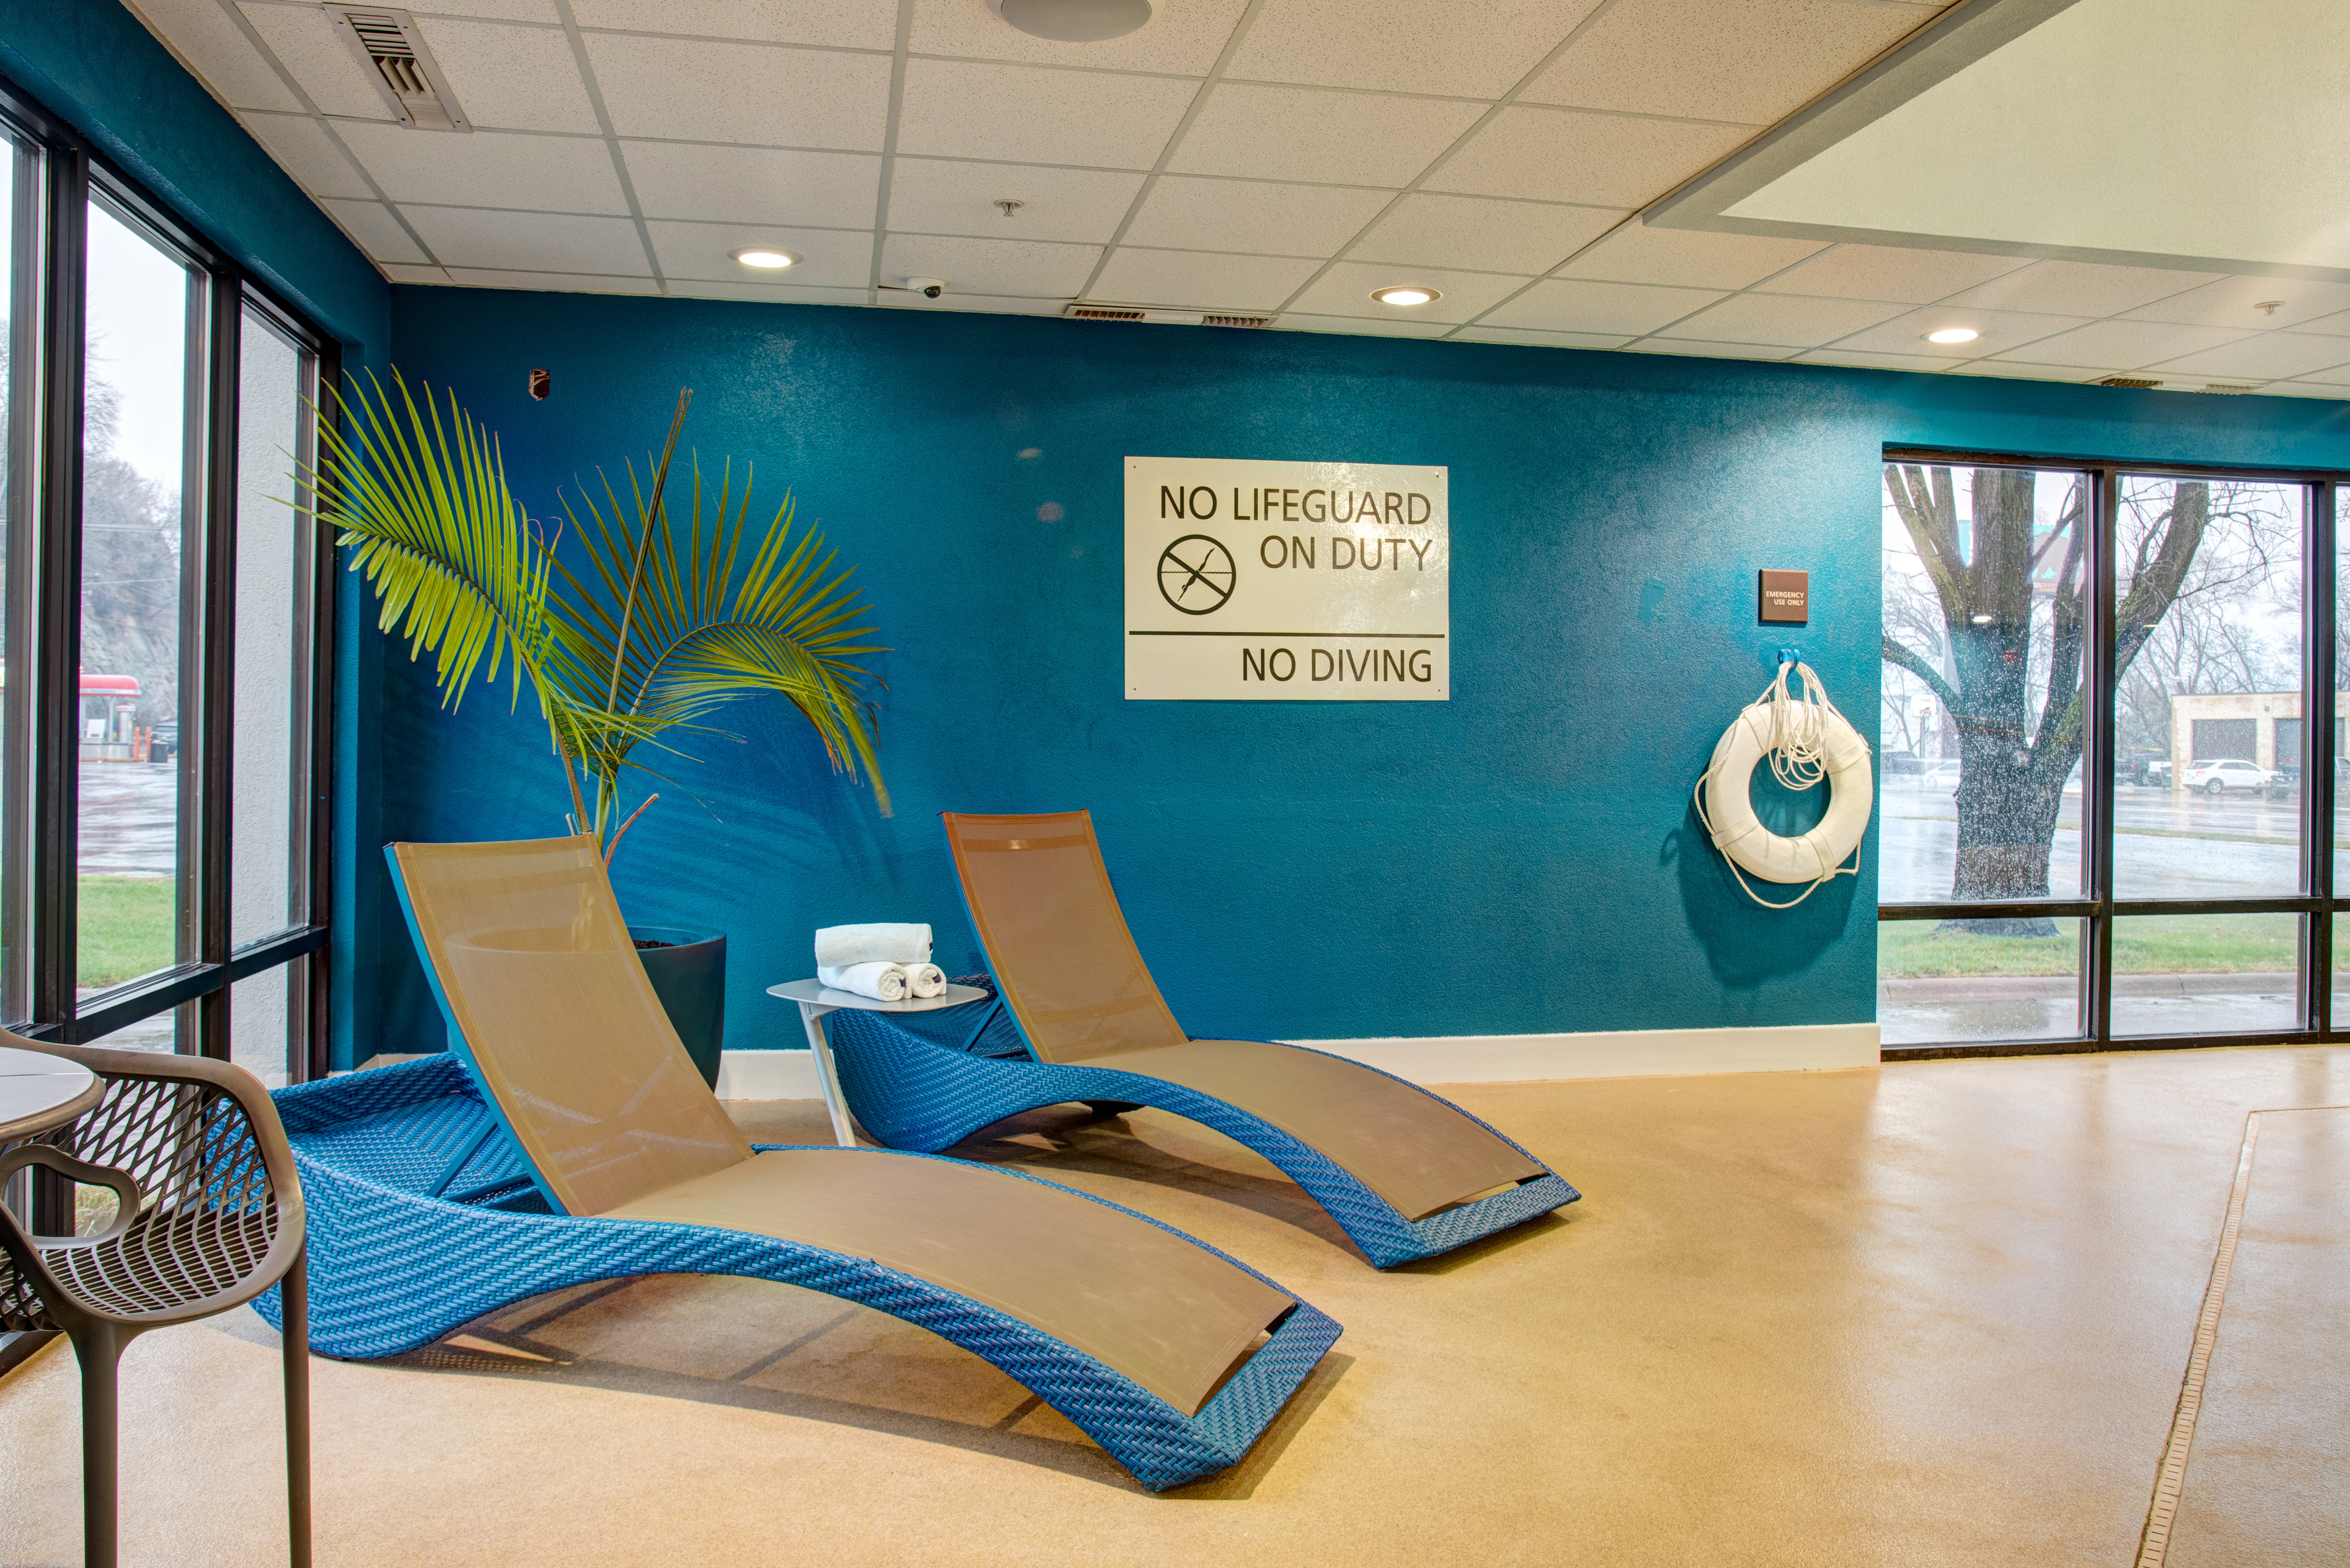 Indoor Pool Area - Lounge Chairs